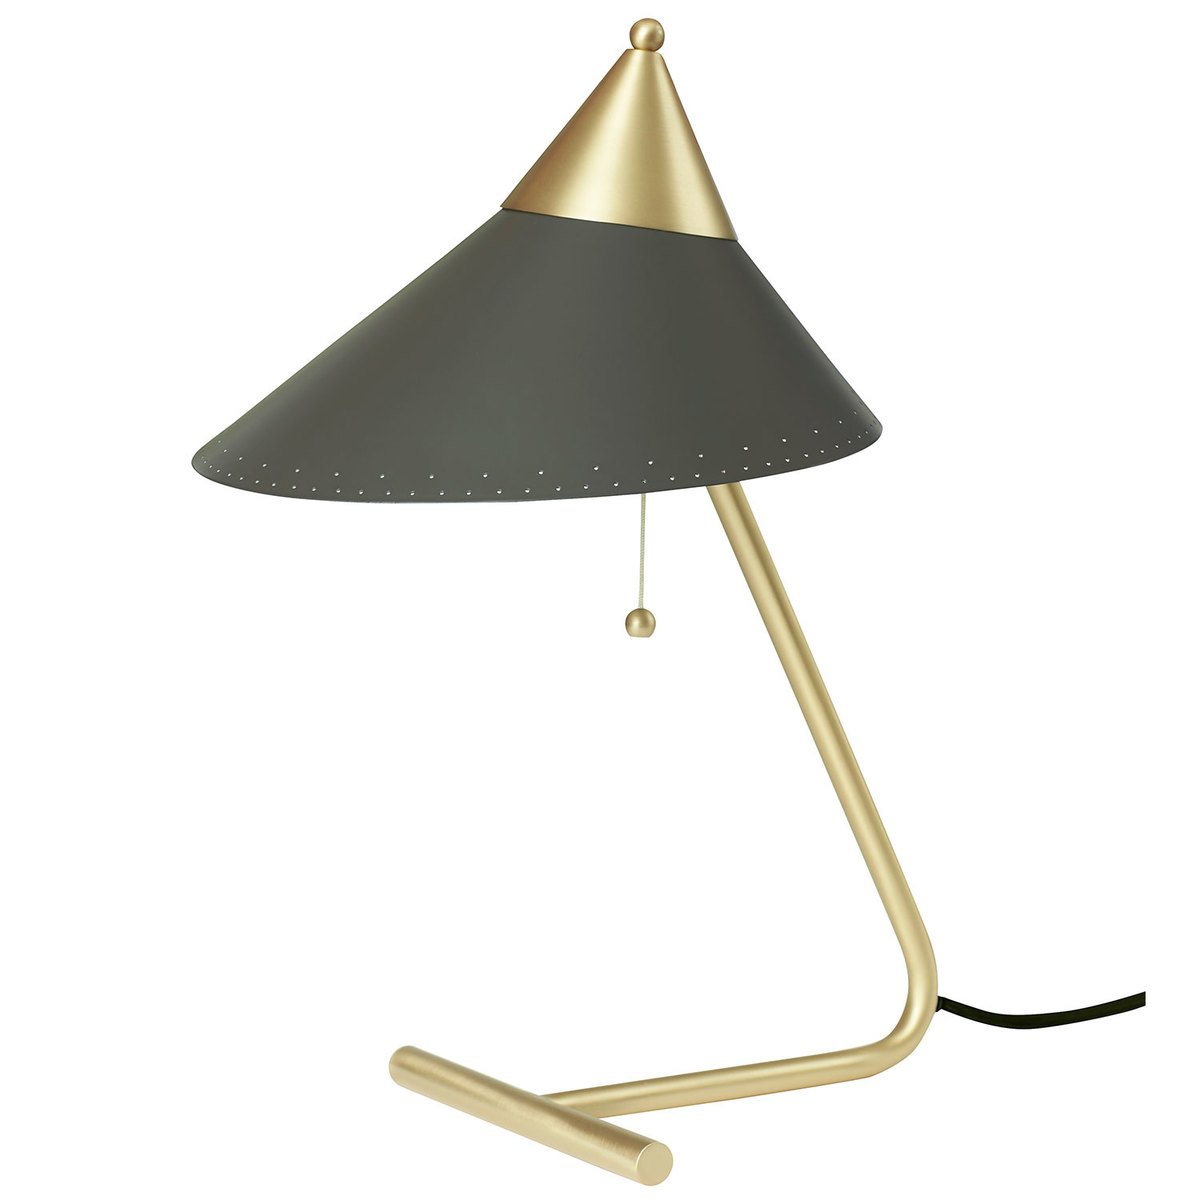 Warm Nordic Brass Top Table Lamp, Charcoal